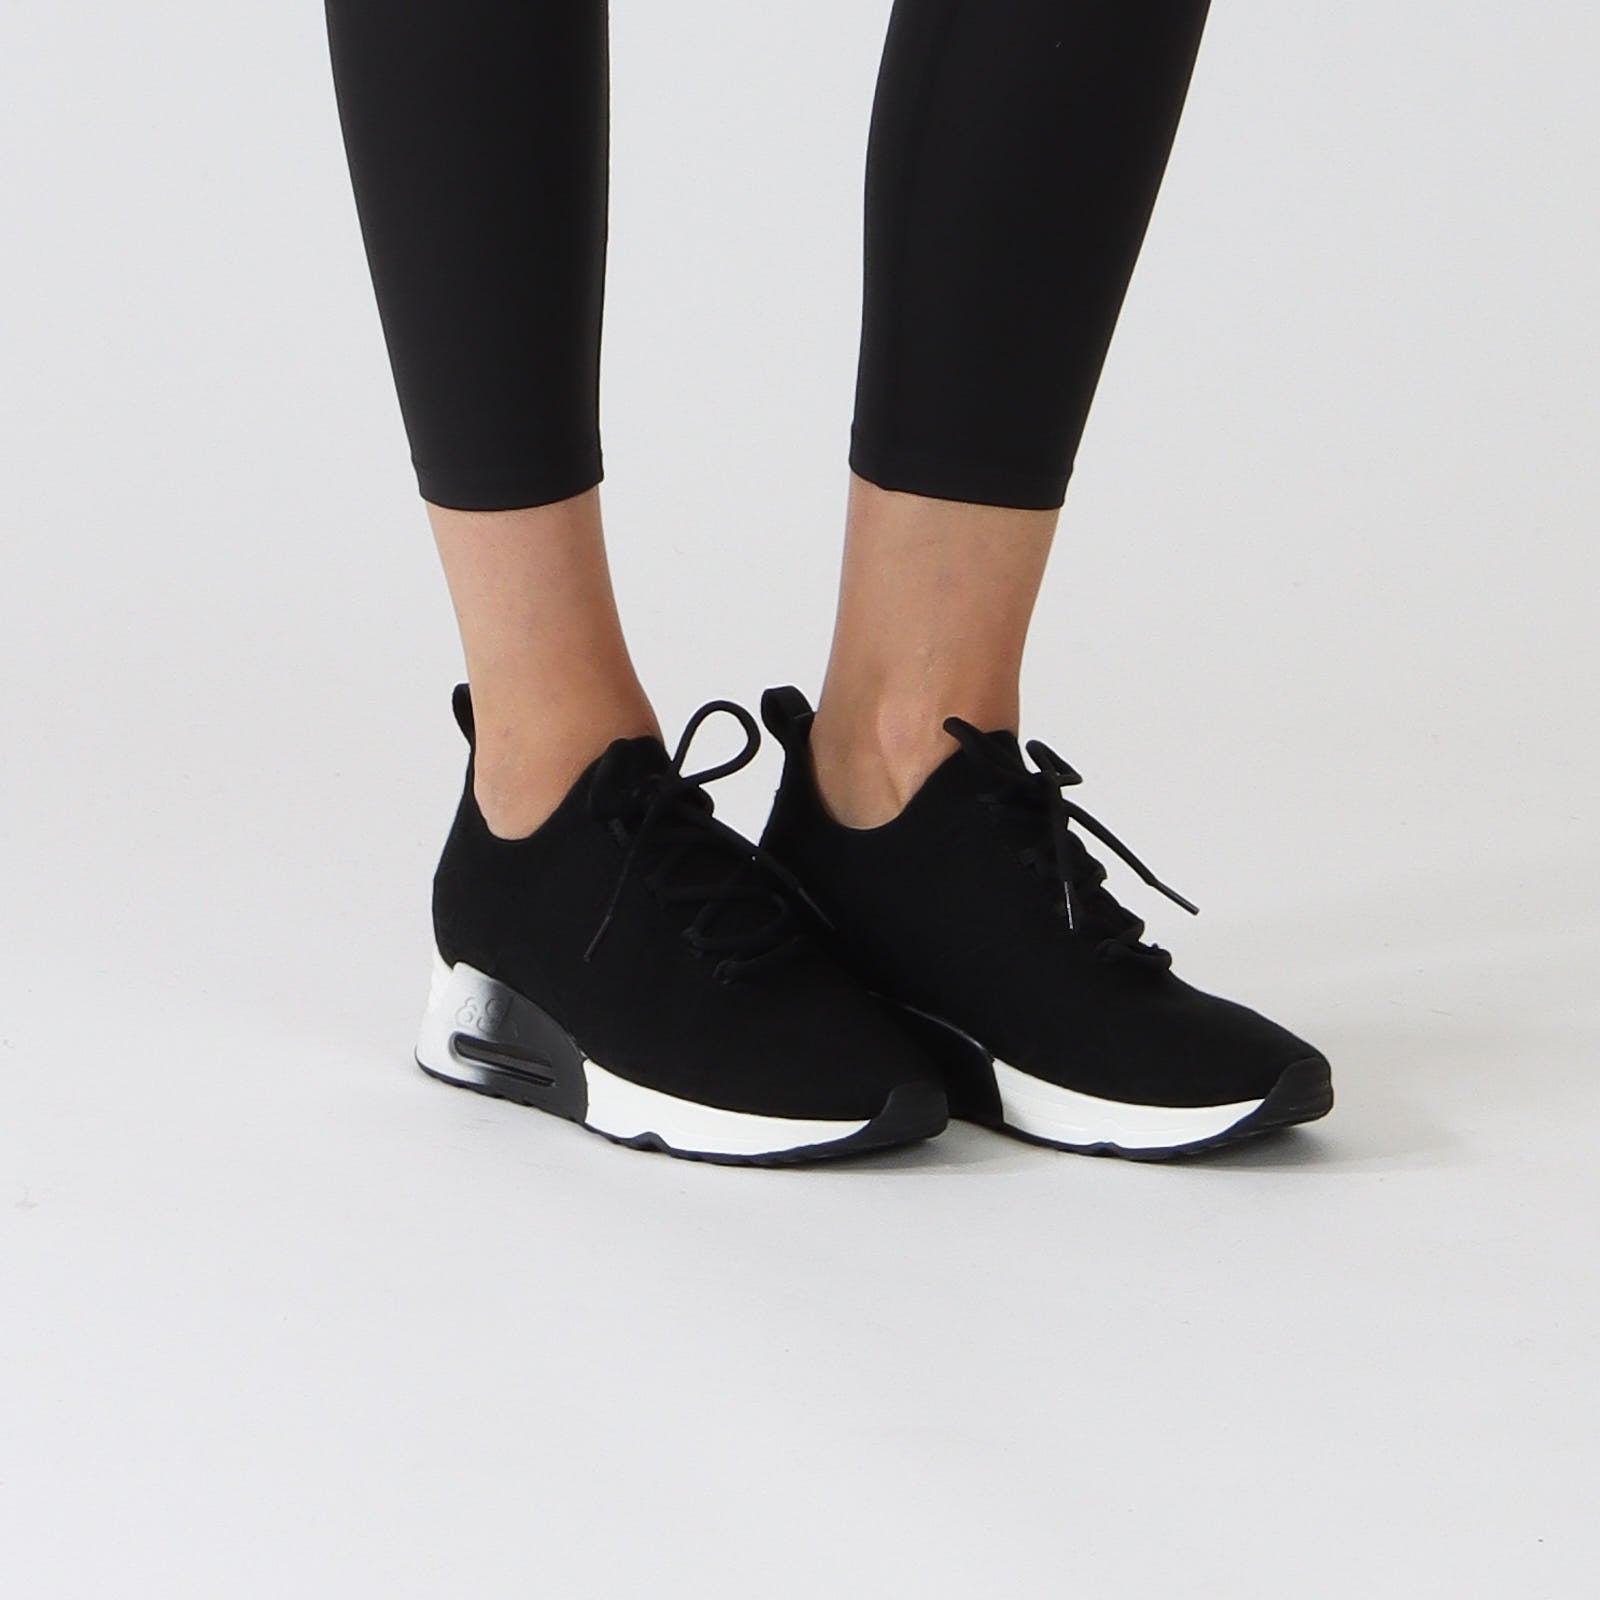 Lucky Star Black Knit Sneakers